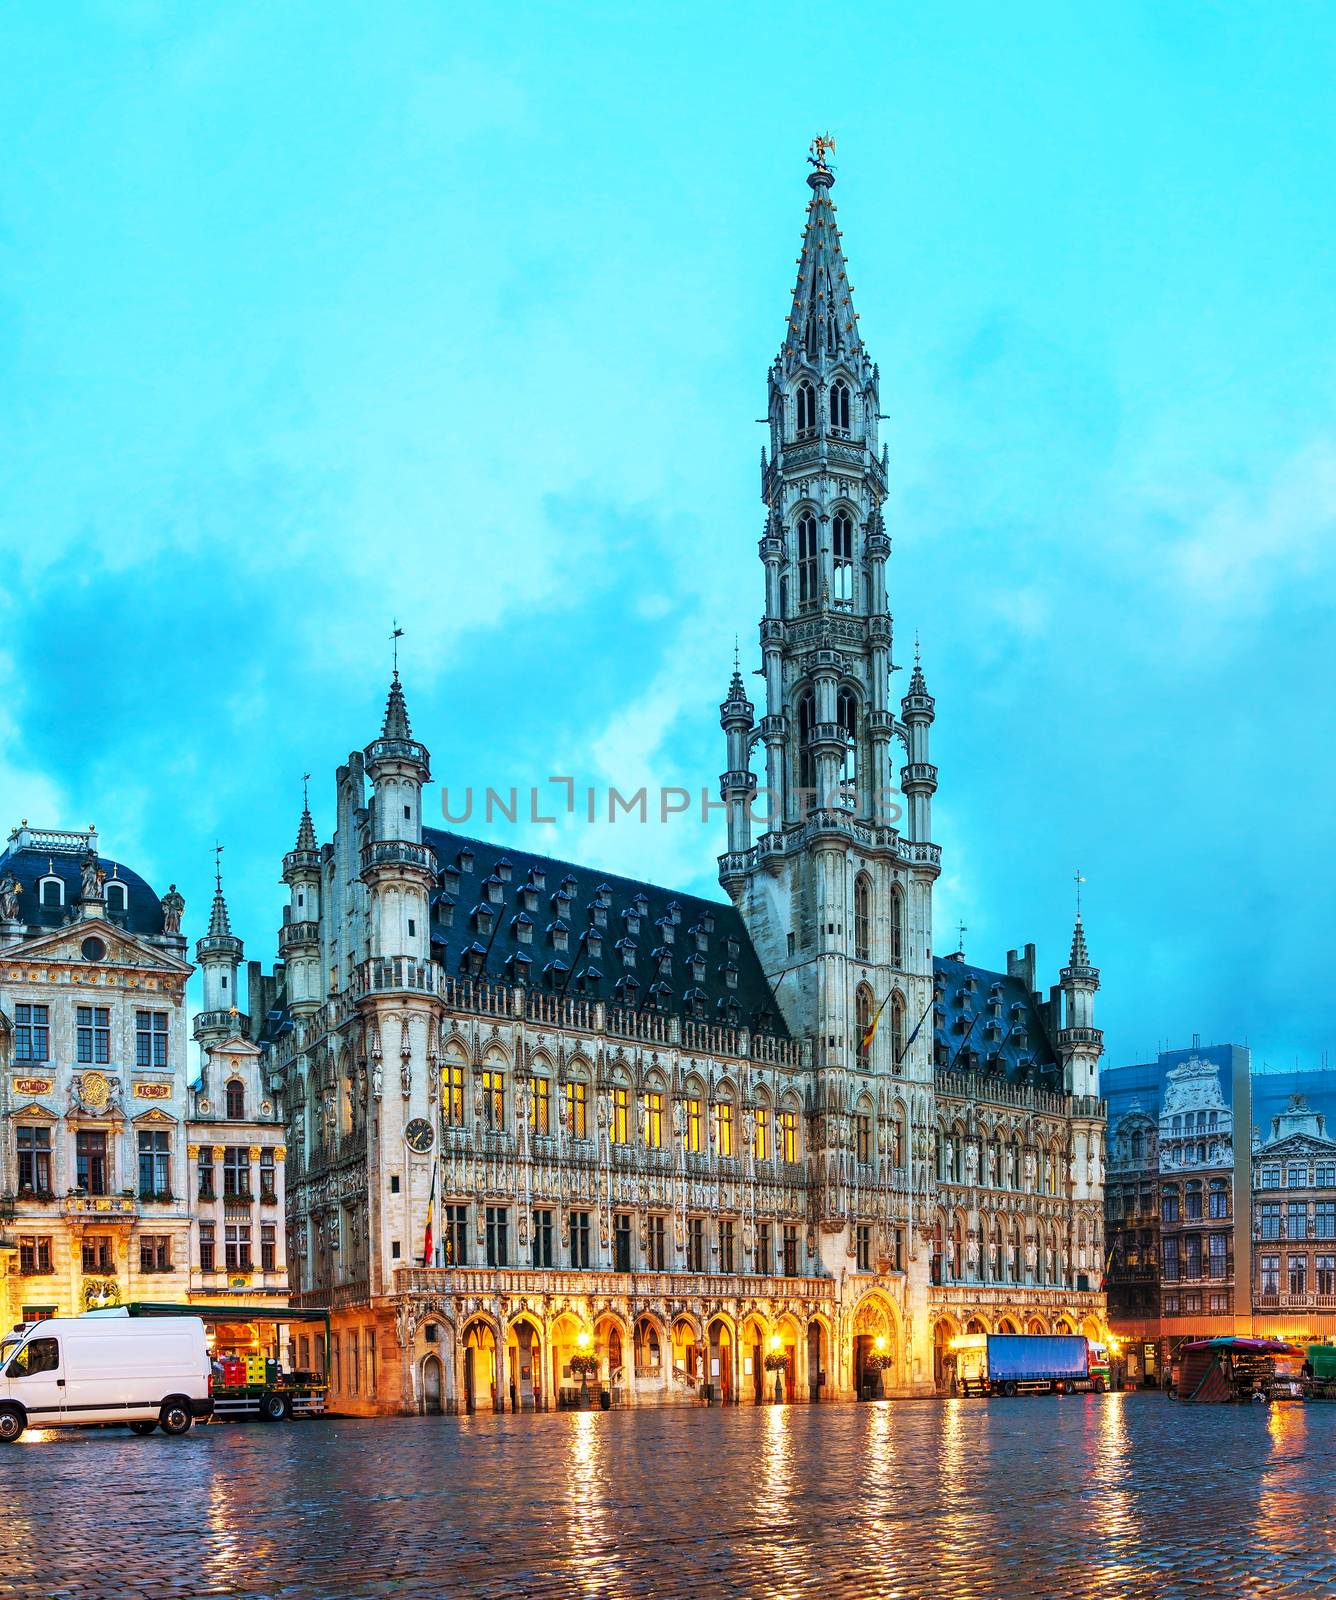 Grand Place with the City Hall in Brussels, Belgium